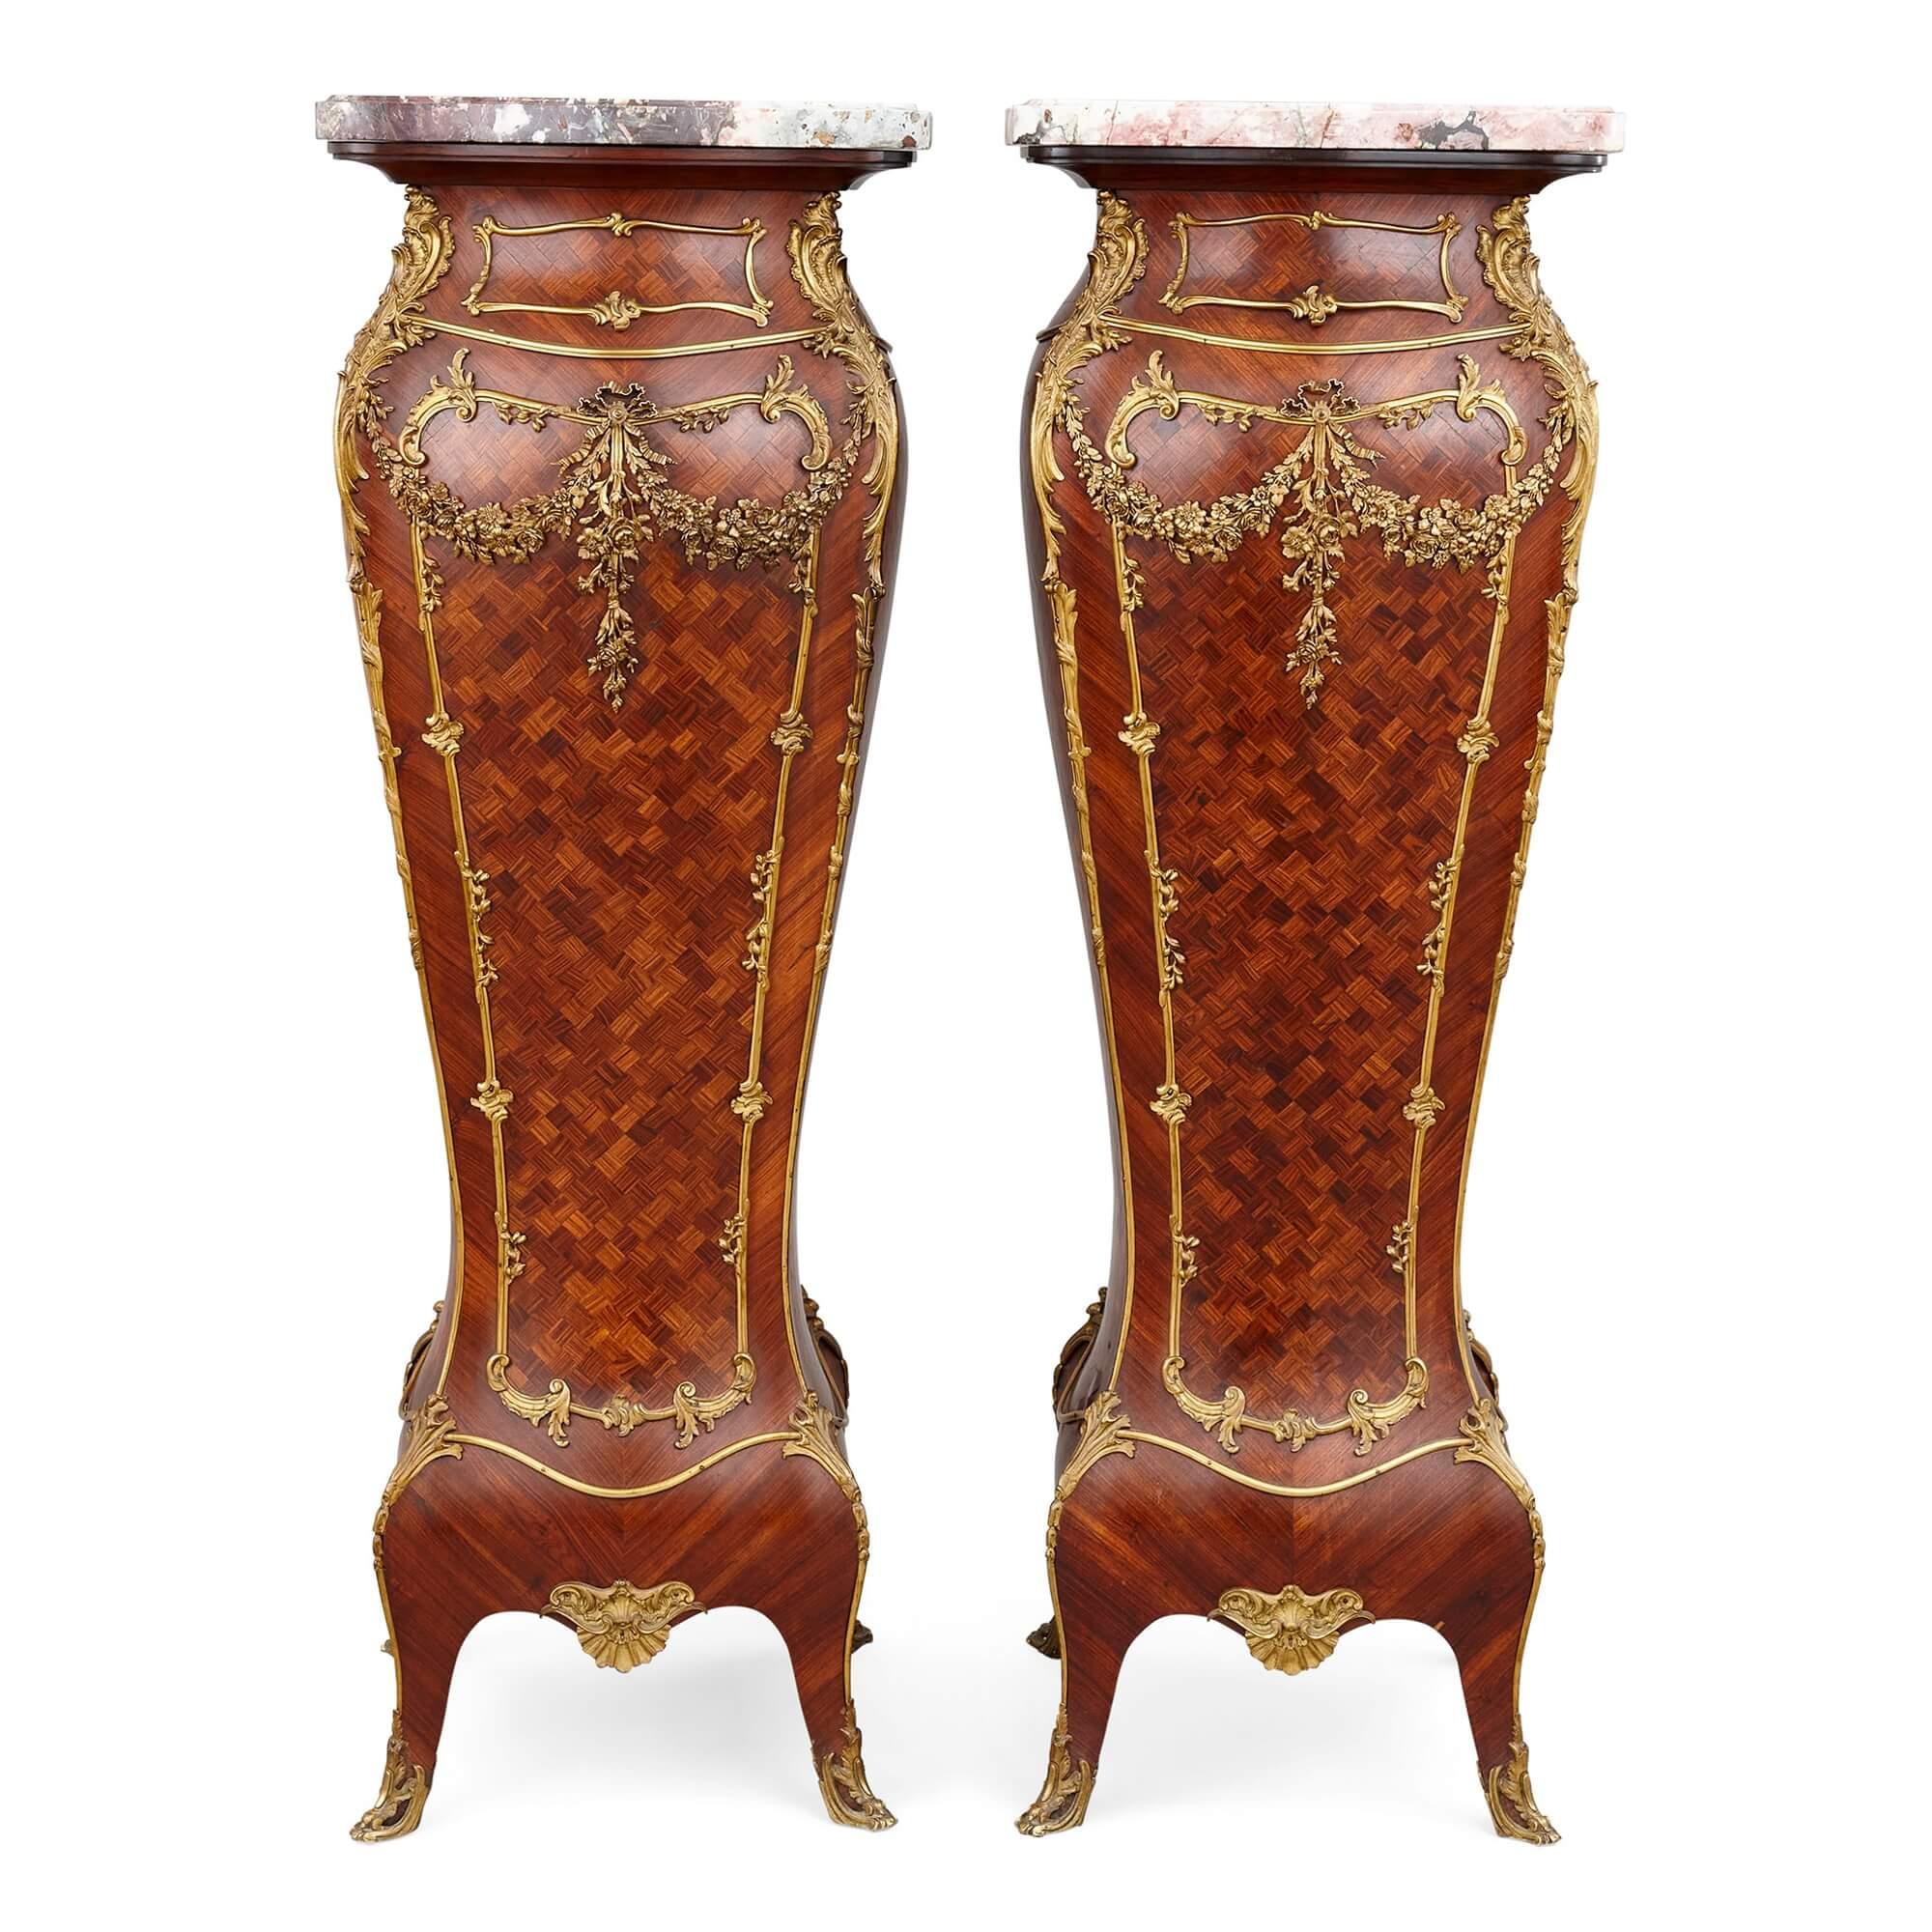 A pair of gilt-bronze, parquetry and marble pedestal by Alexandre Hugnet, Paris
French, Late 19th century
Measures: Height 122cm, width 43cm, depth 43cm

Made by the Parisian craftsman Alexandre Hugnet, son of the cabinet maker Ainé Hugnet, whom